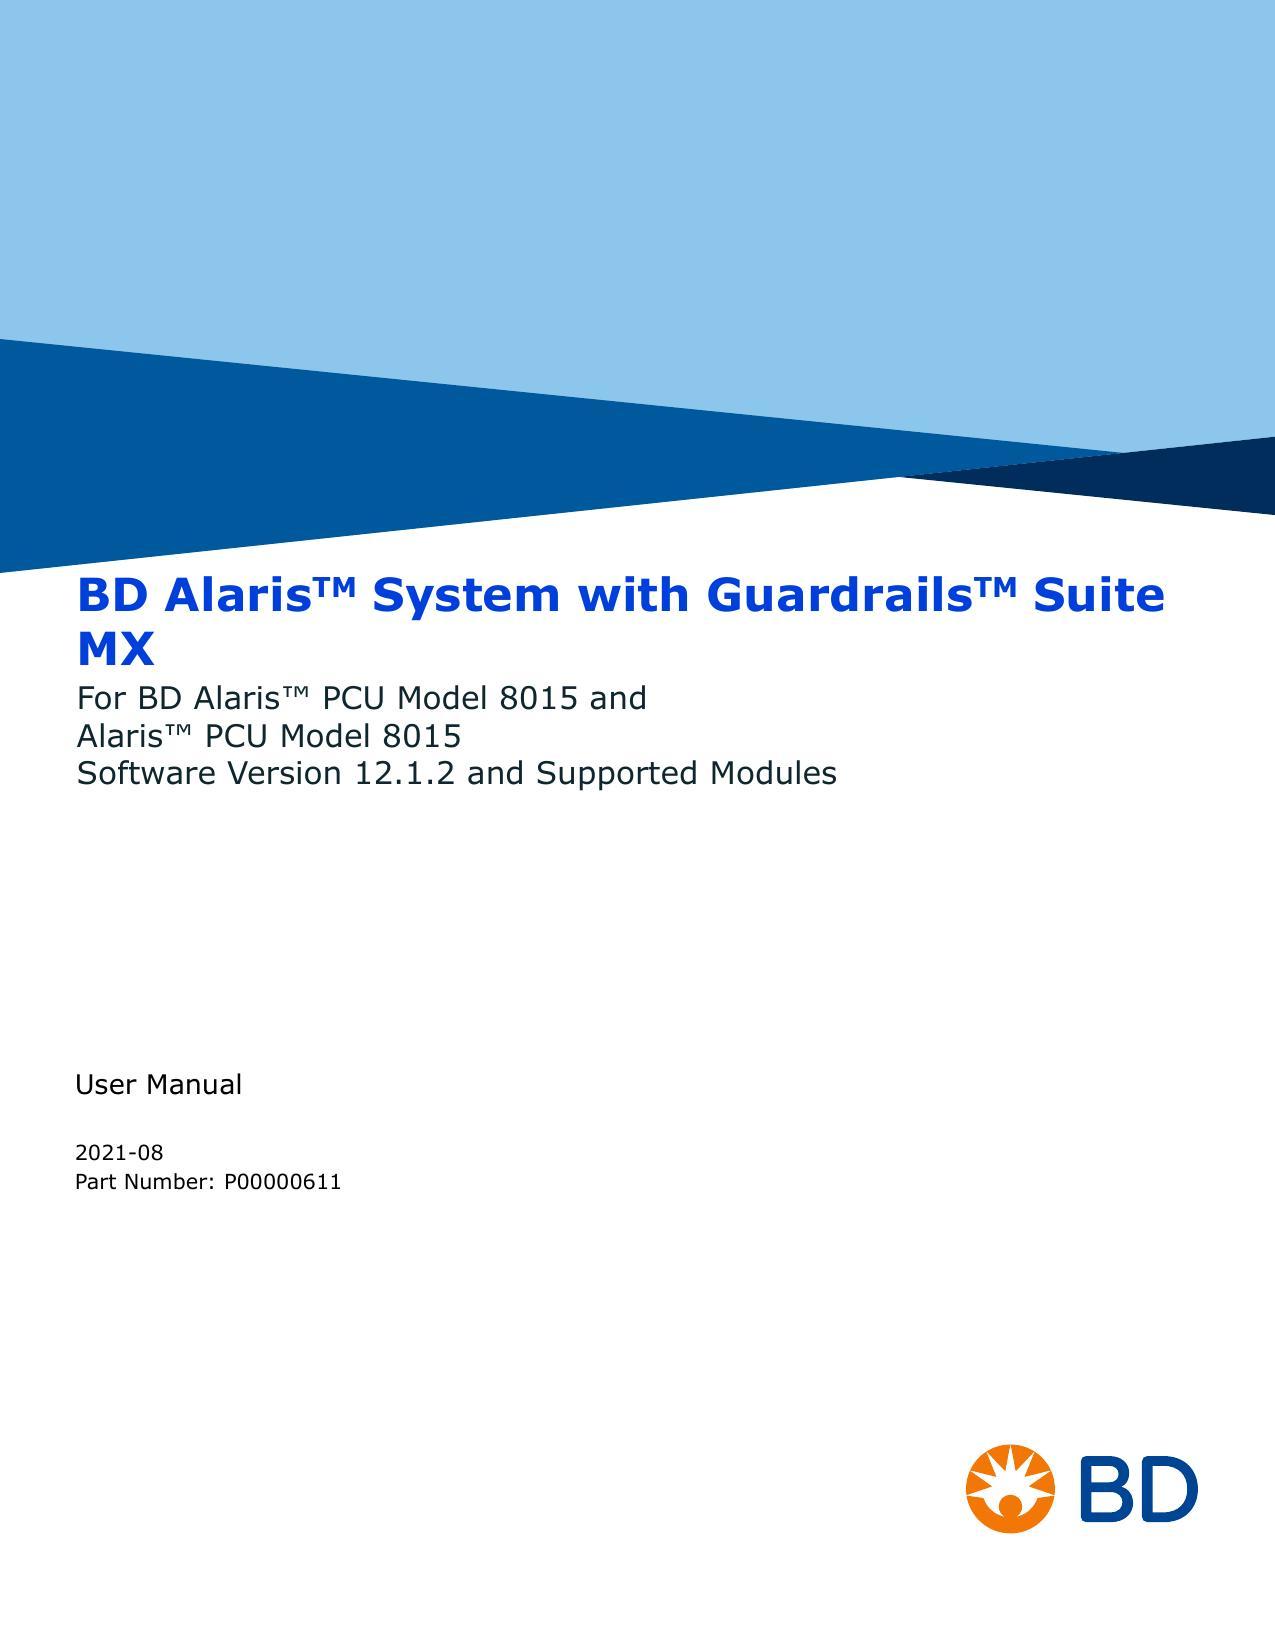 bd-alaris-system-with-guardrails-suite-mx-user-manual-for-bd-alaris-pcu-model-8015-and-alaris-pcu-model-8015-software-version-1212-and-supported-modules.pdf